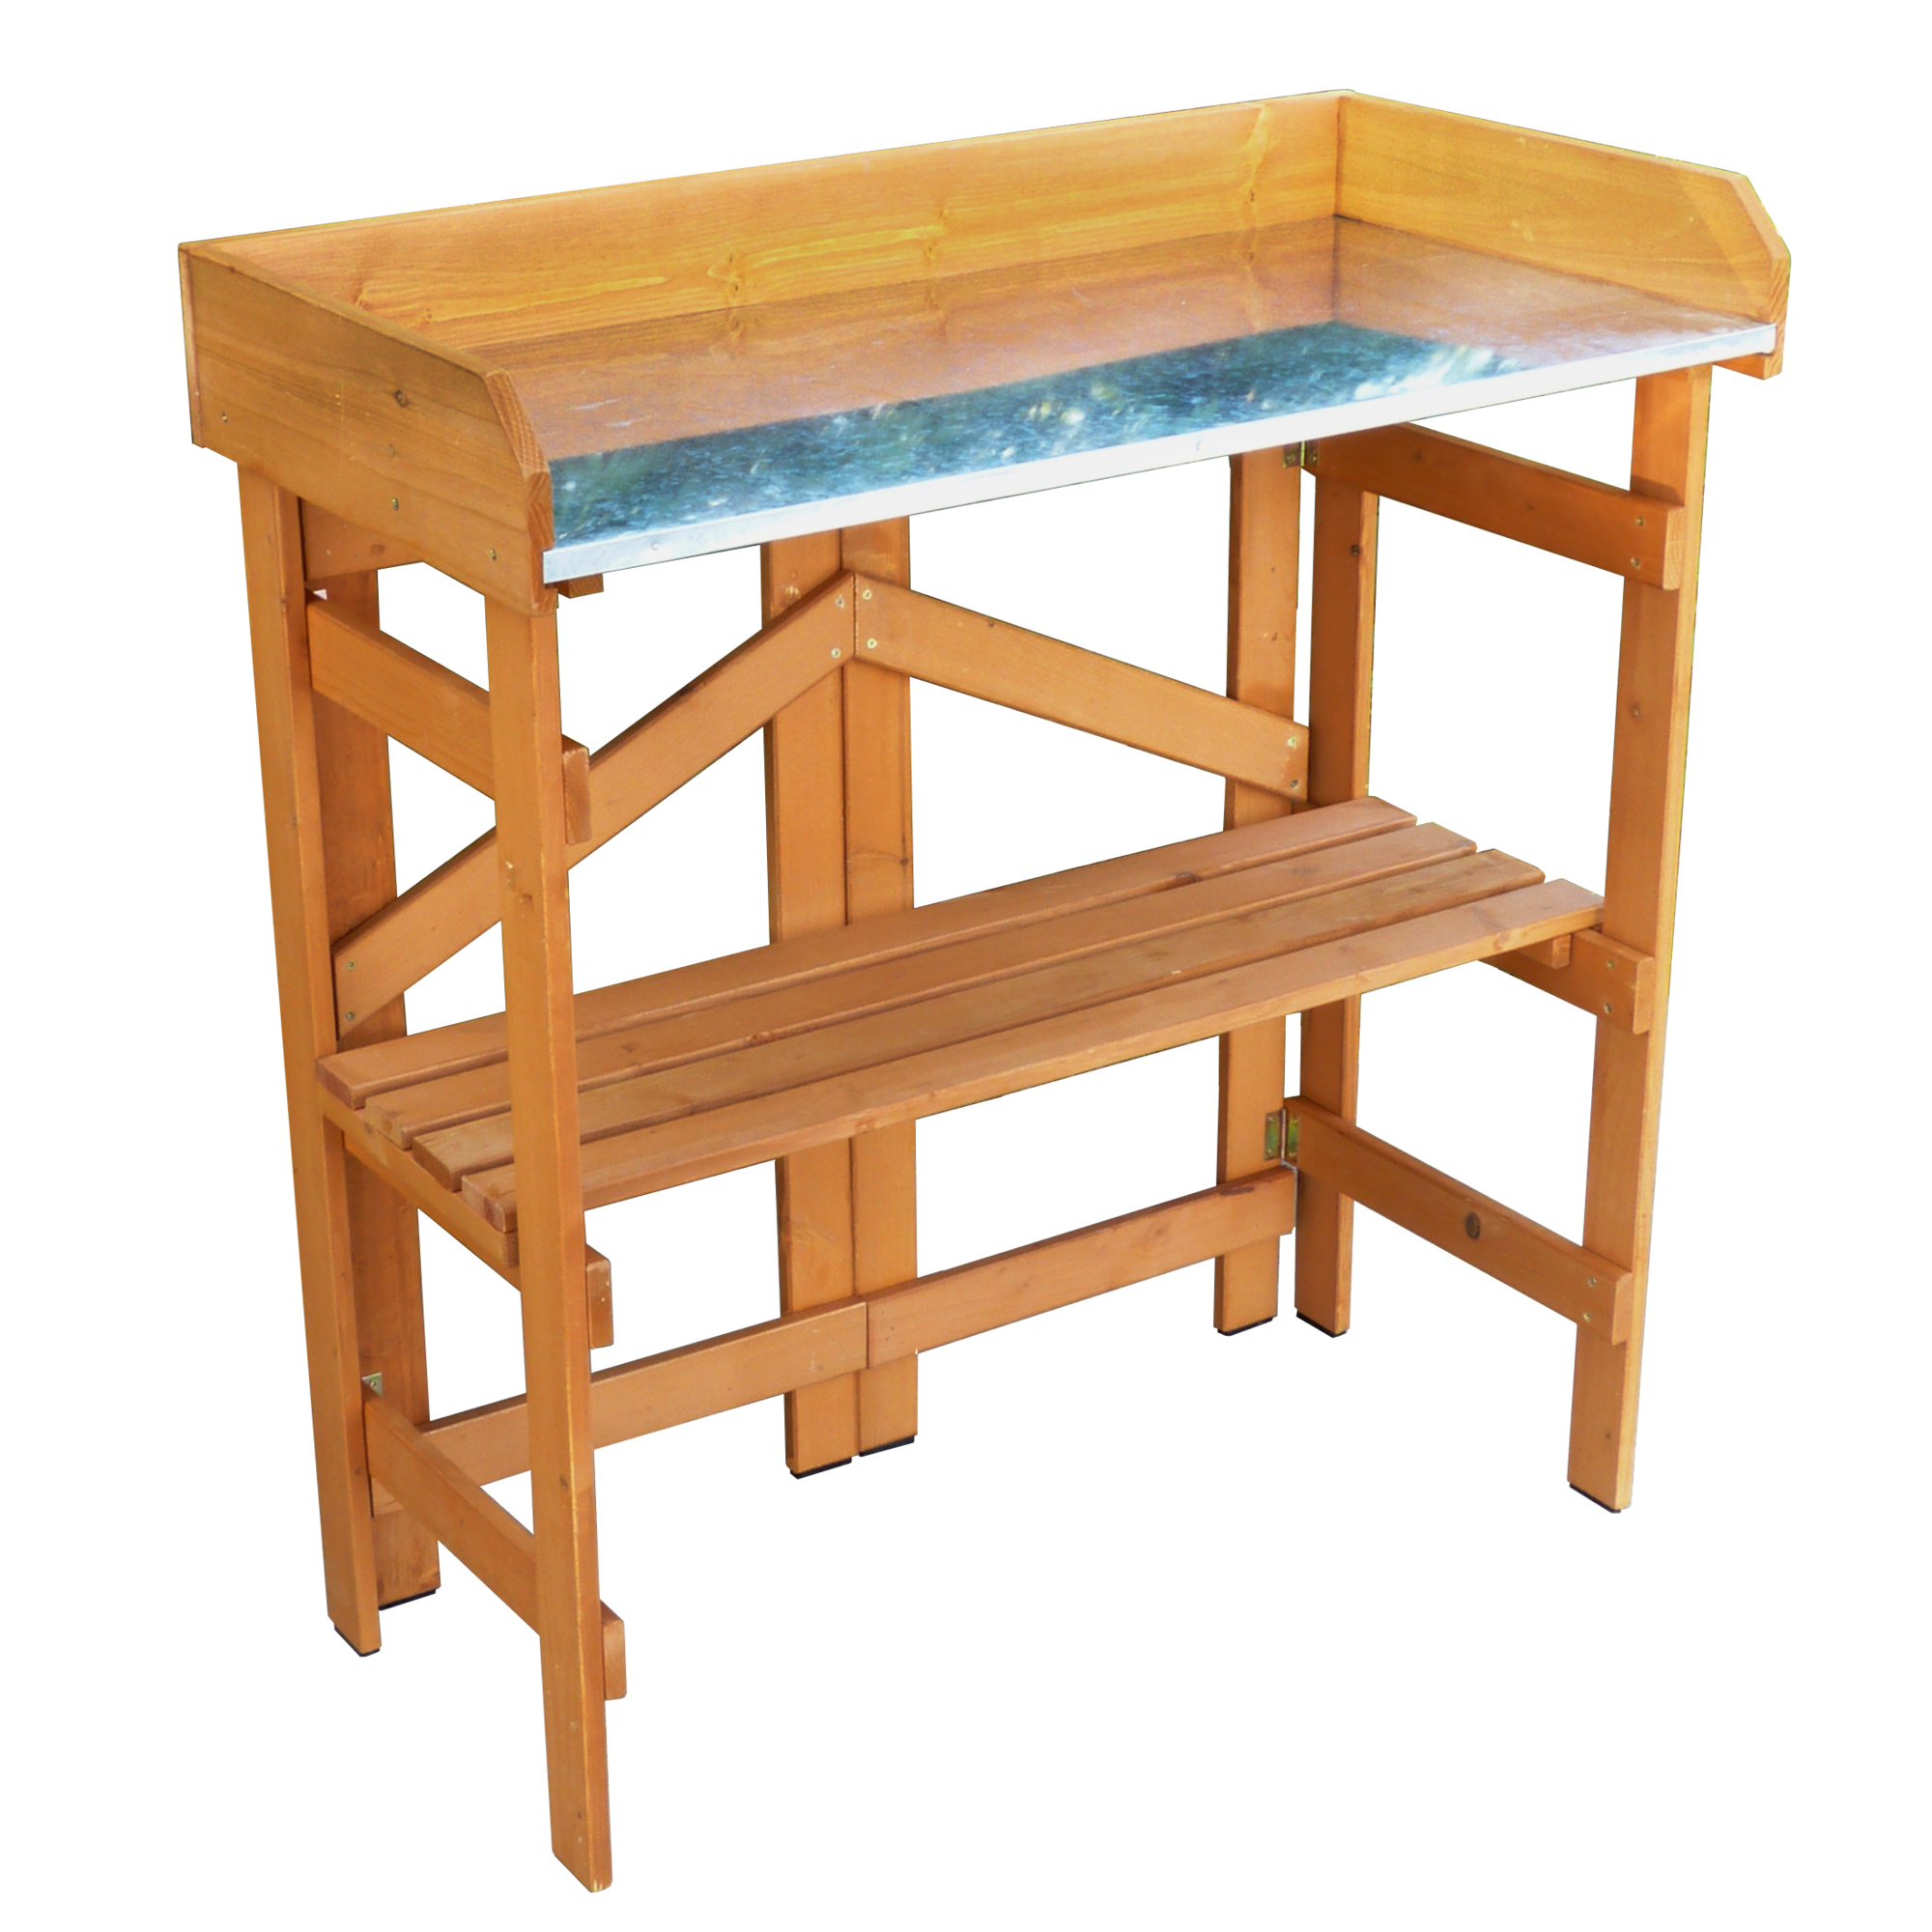 Merry Products, Folding Utility Table Potting Bench, Container Length 15.75 in, Container Width 31.89 in, Material Wood, Model PTB0080010010